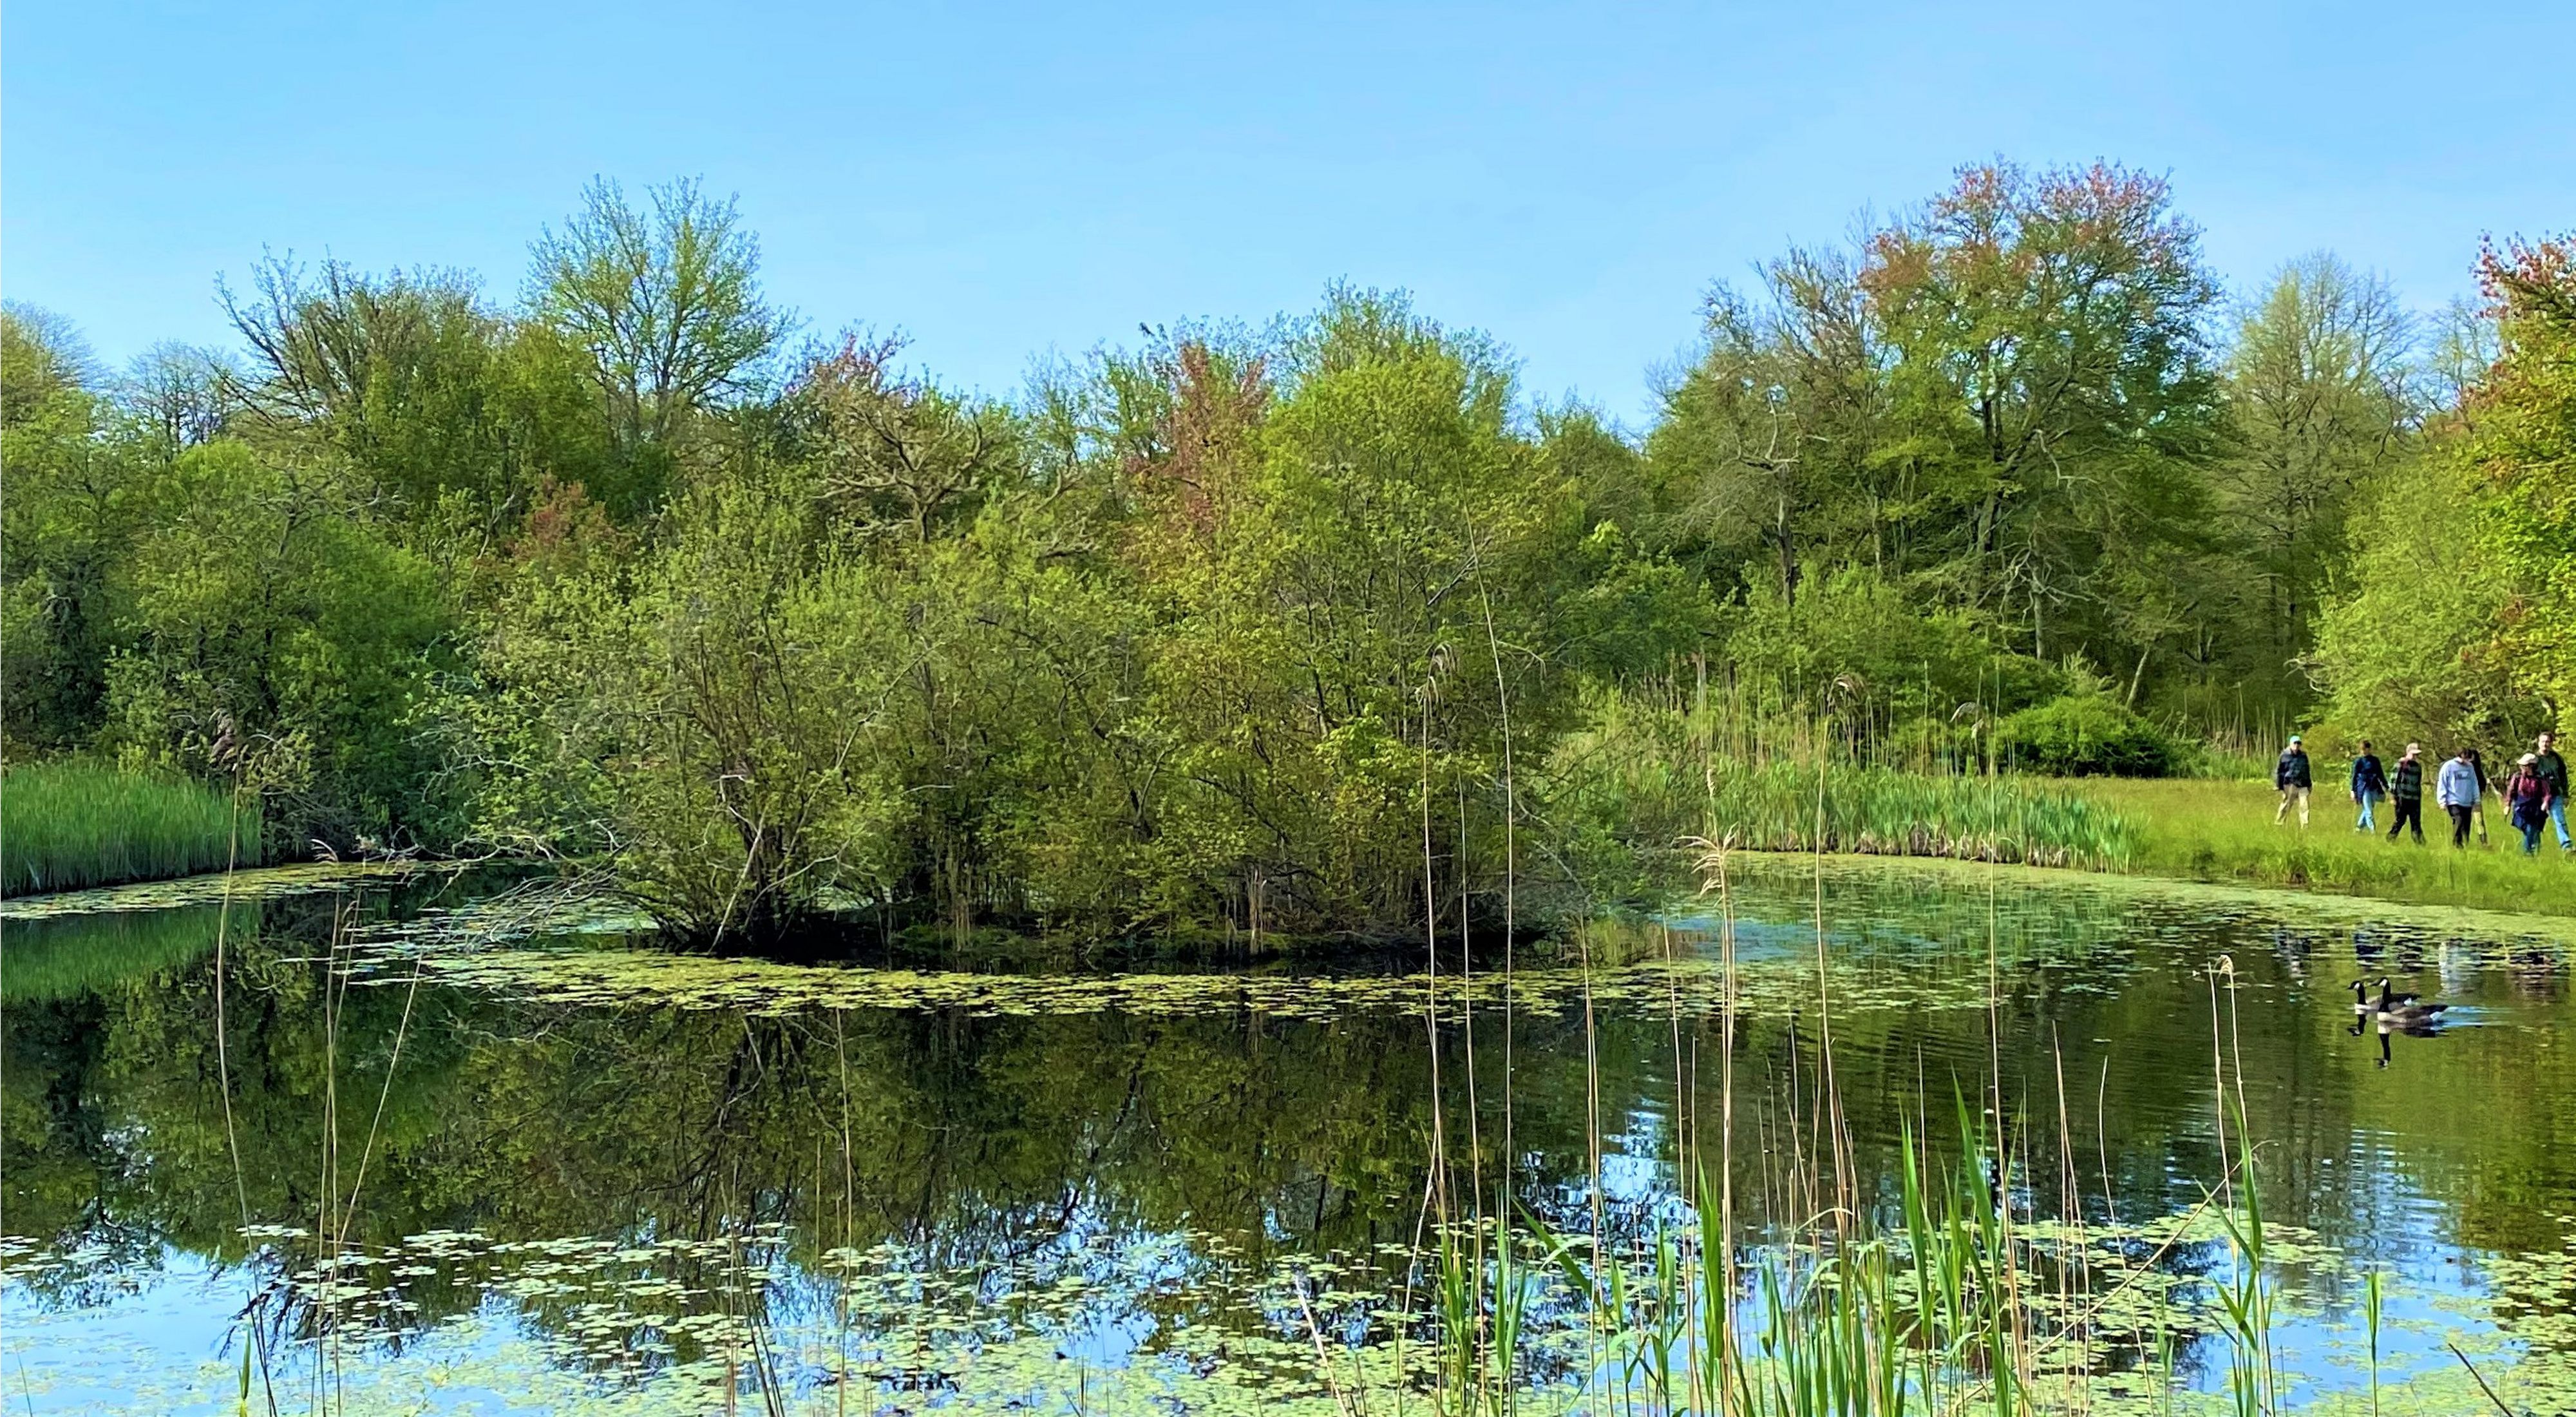 A small pond in a forested clearing reflects the blue sky above. 